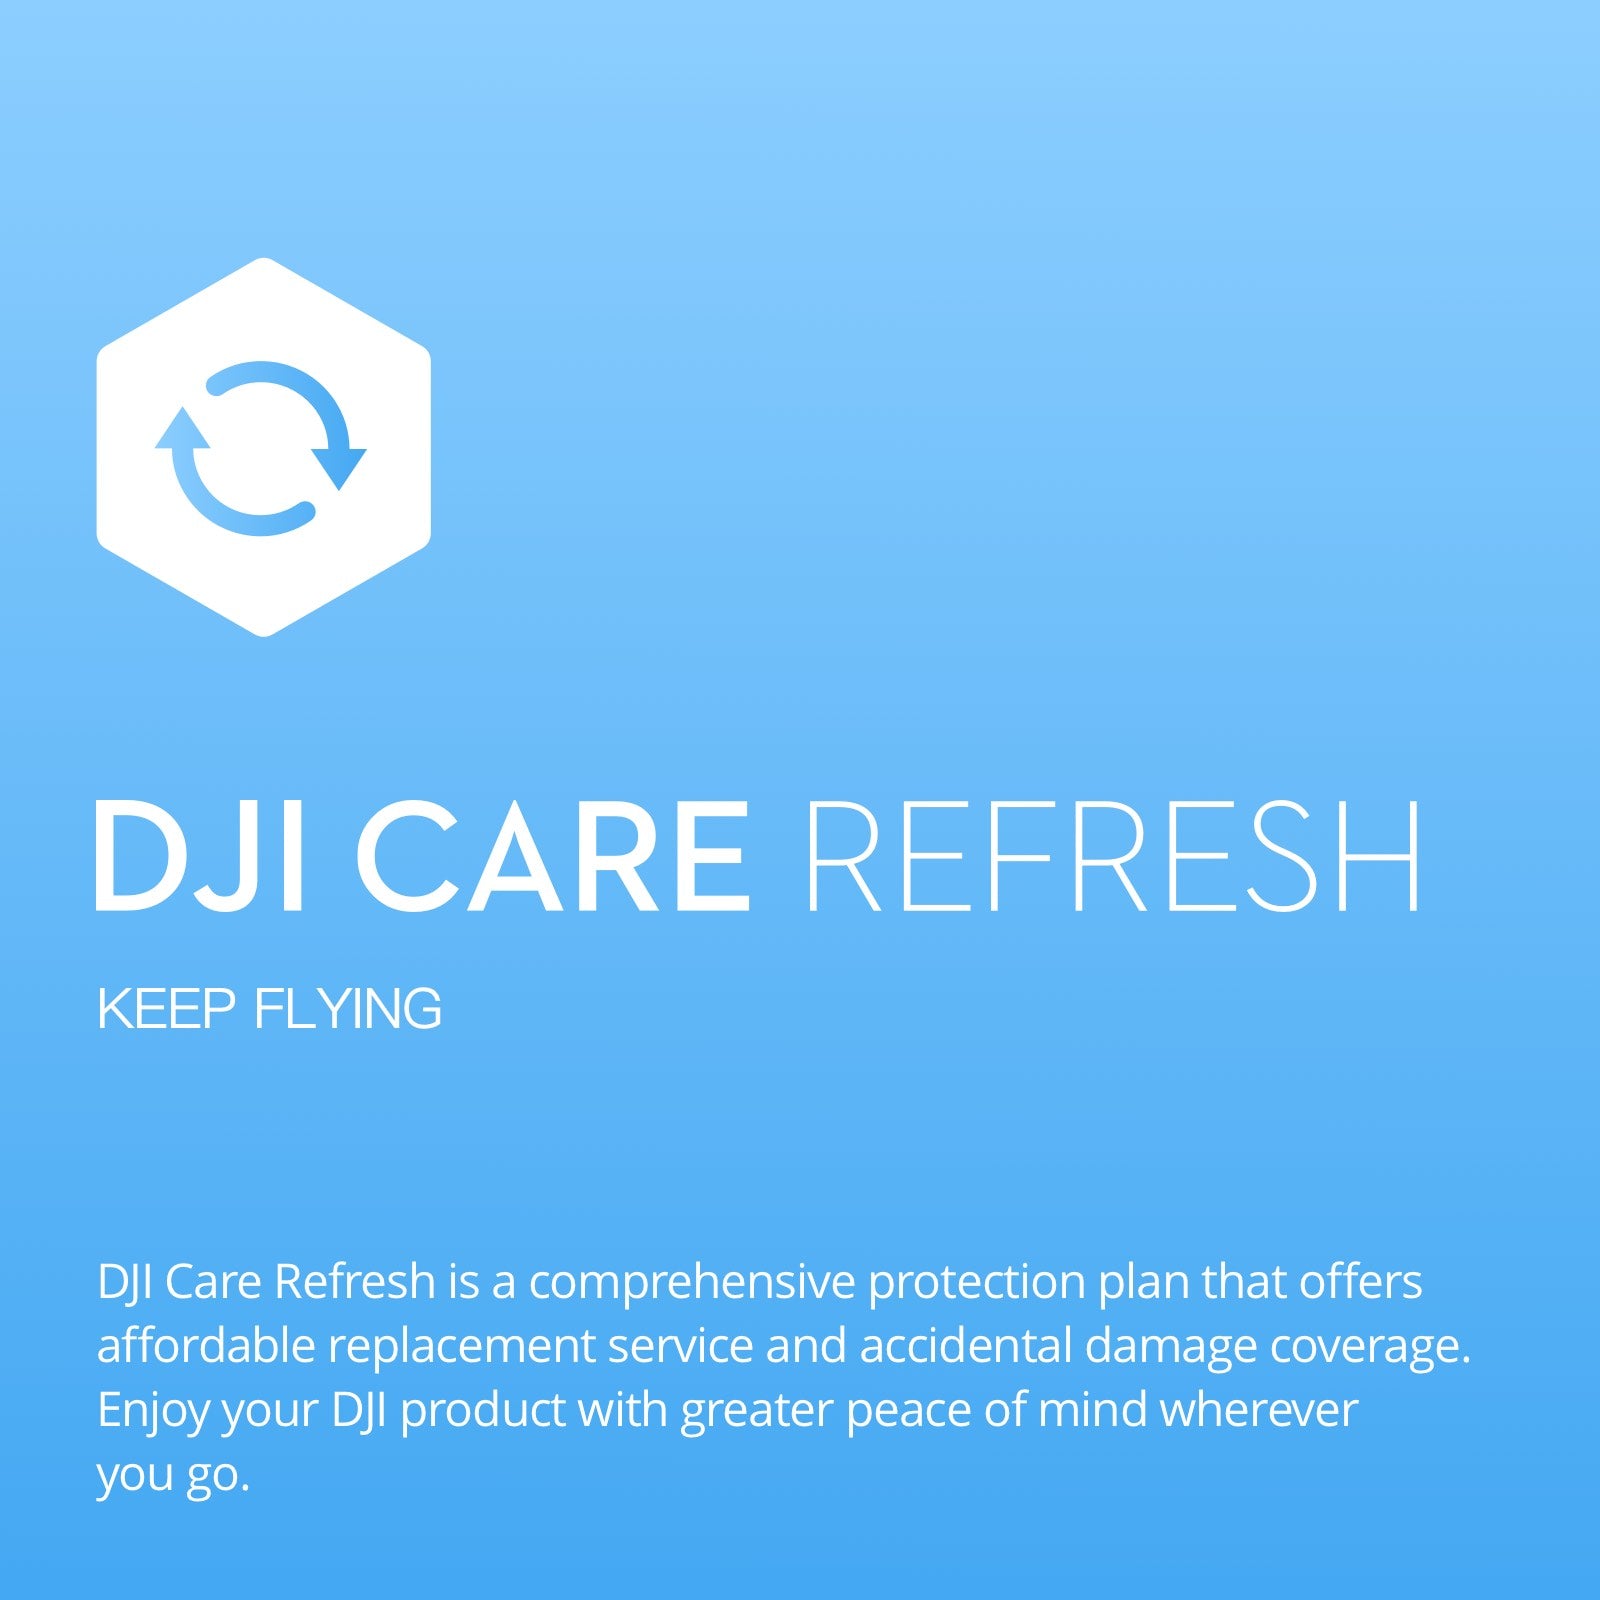 DJI Care Refresh - extended Warrantee and Accidental Damage Protection. DJI Florida Drone Supply DJI Care Refresh - extended Warrantee and Accidental Damage Protection.